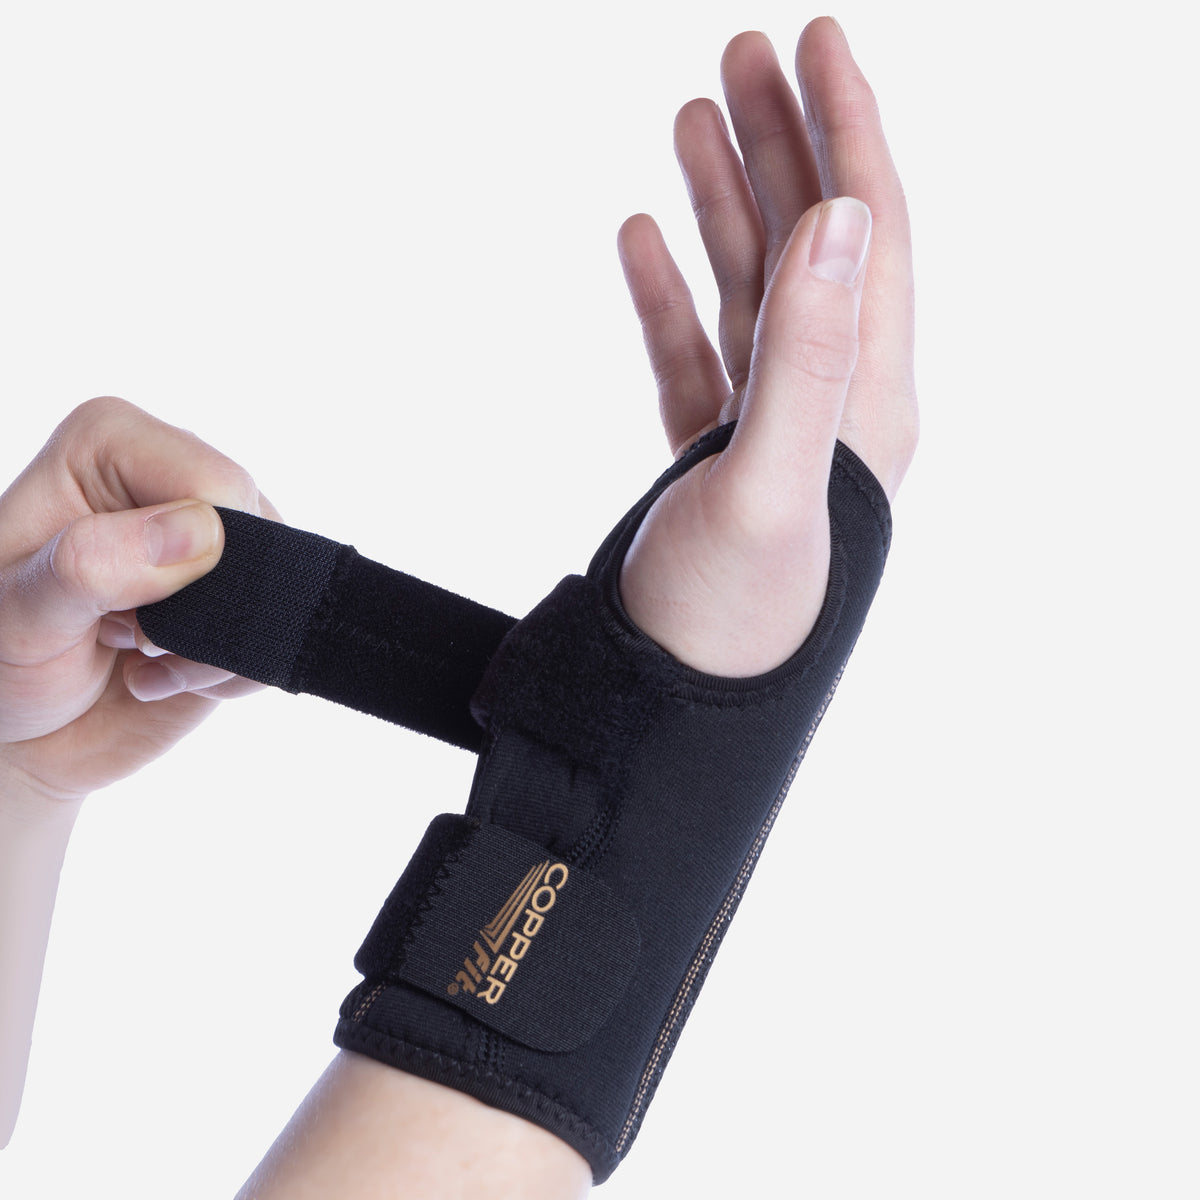 Copper Compression Recovery Wrist Brace - Copper Infused Adjustable Support  Splint for Pain, Car - Orthotics, Braces & Sleeves